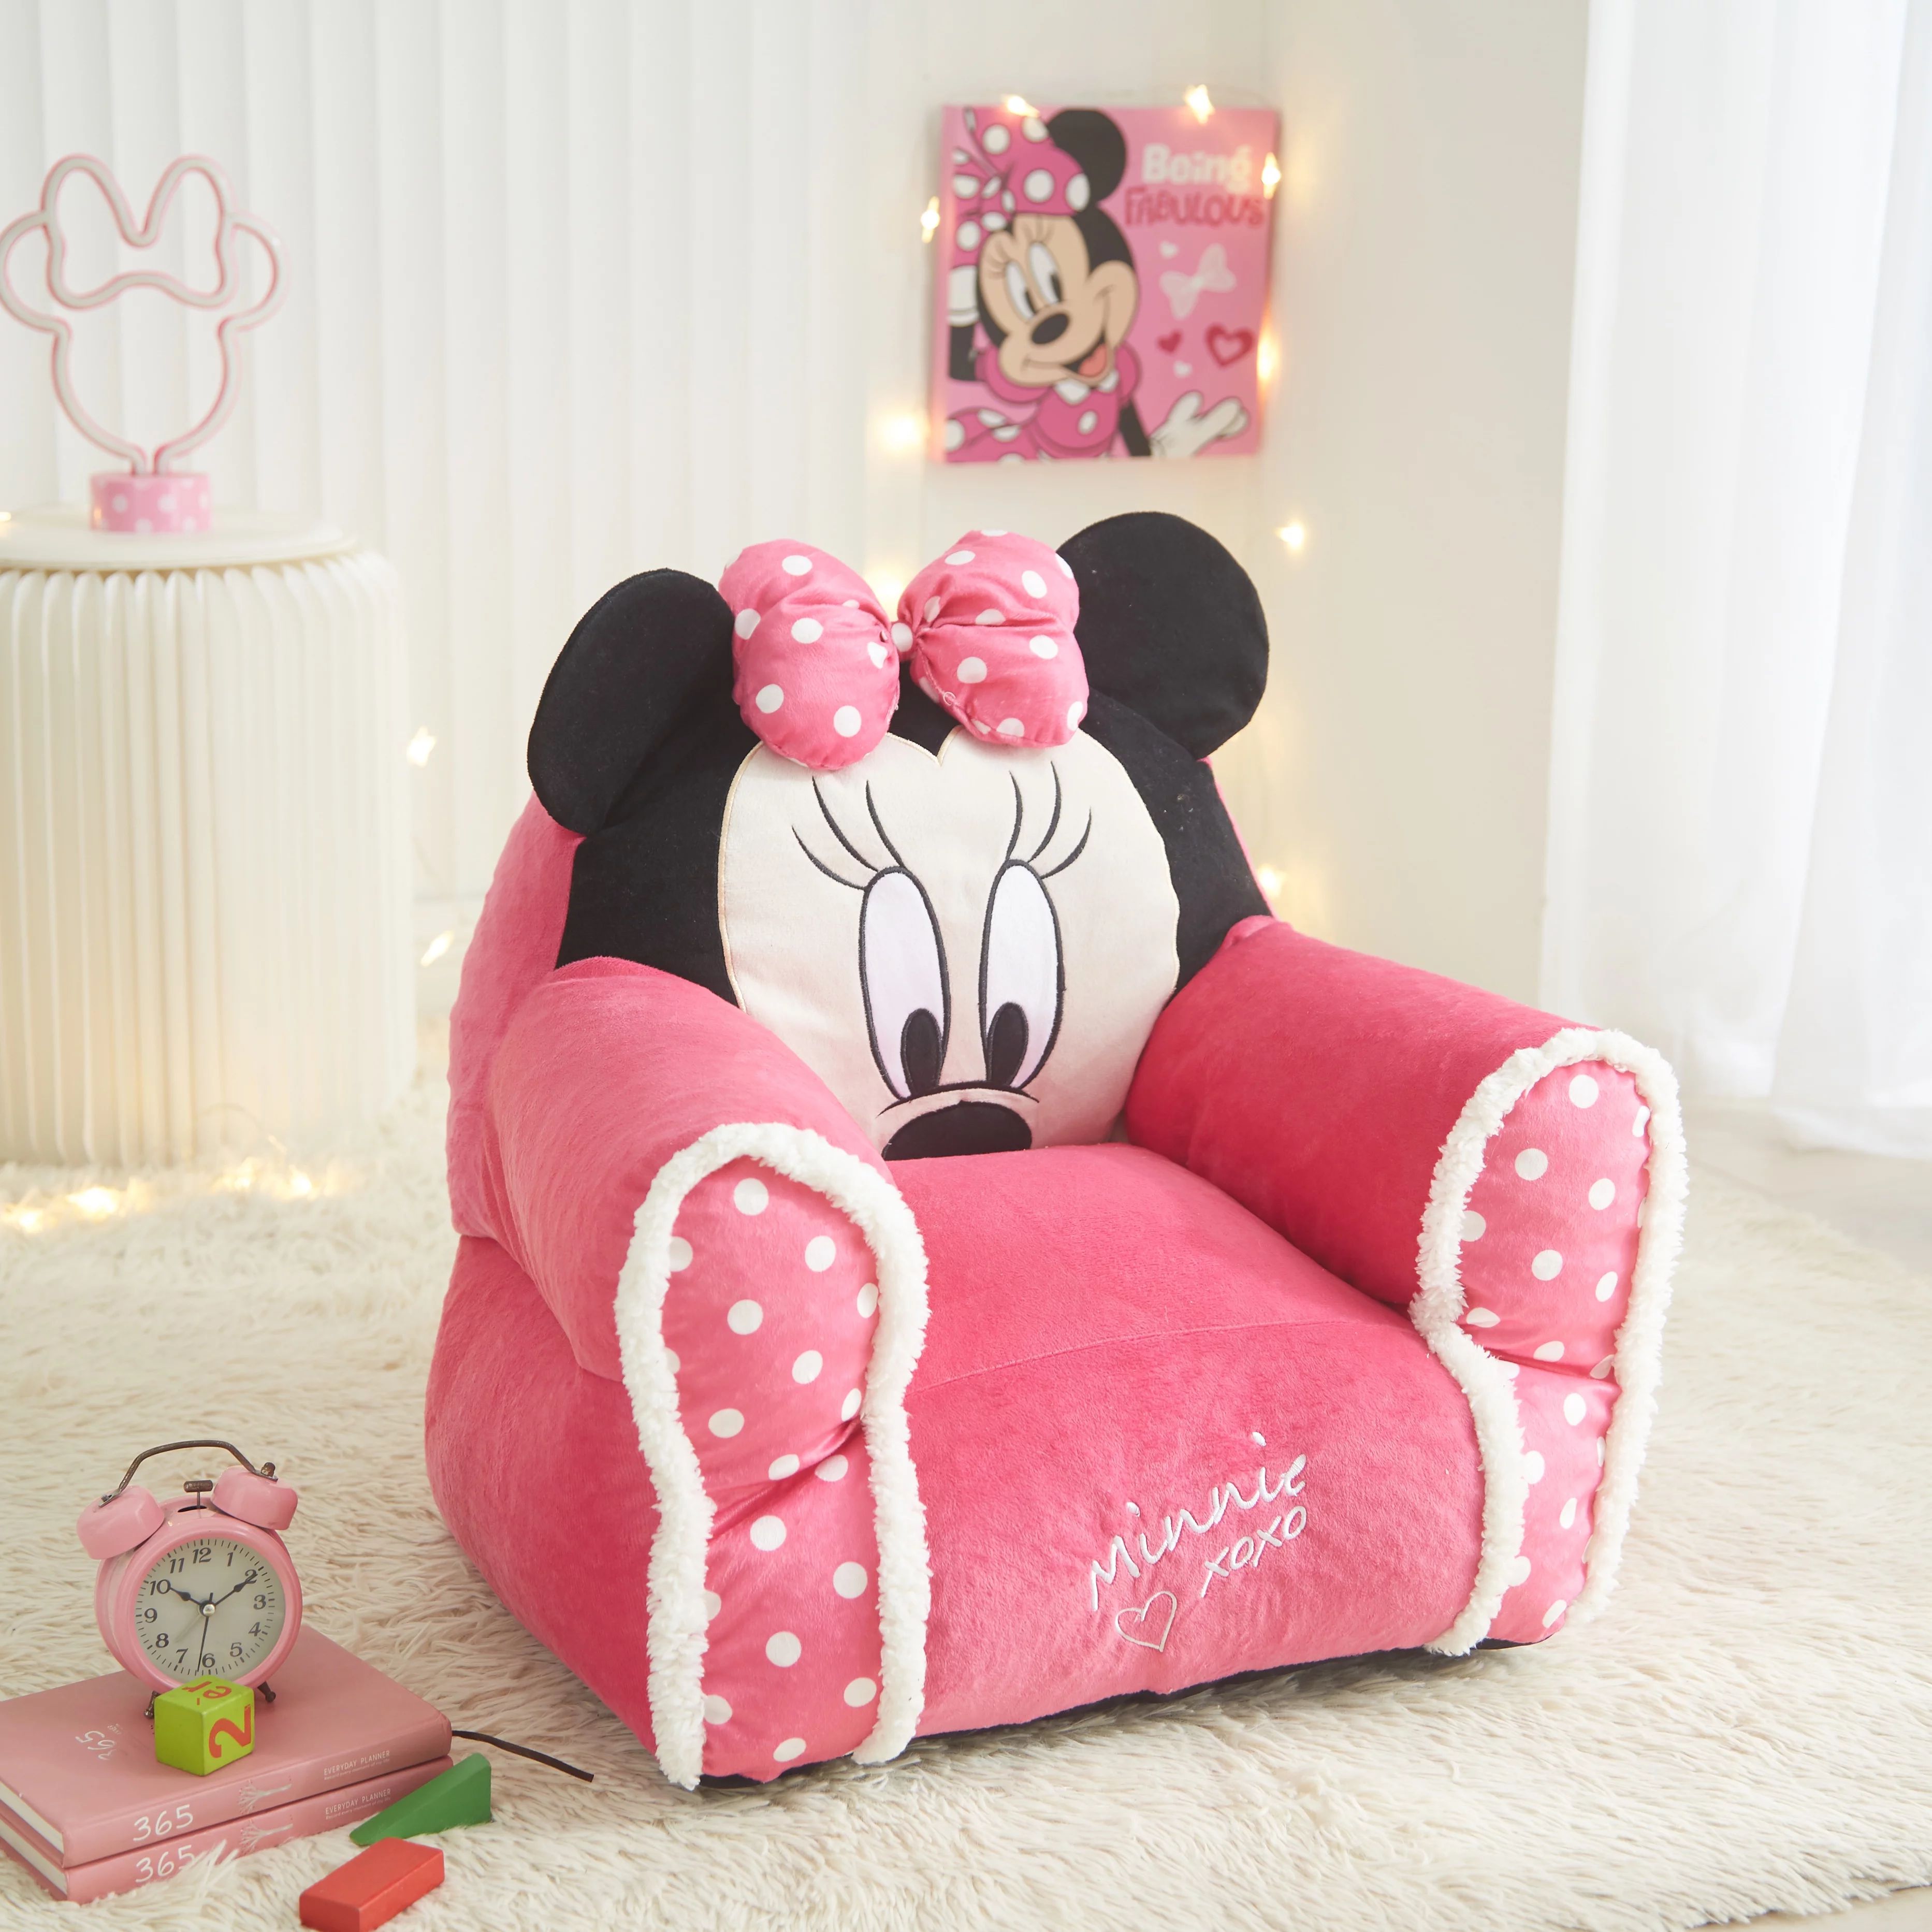 Disney Minnie Mouse Kids Figural Bean Bag Chair with Sherpa Trimming, Multi-color | Walmart (US)